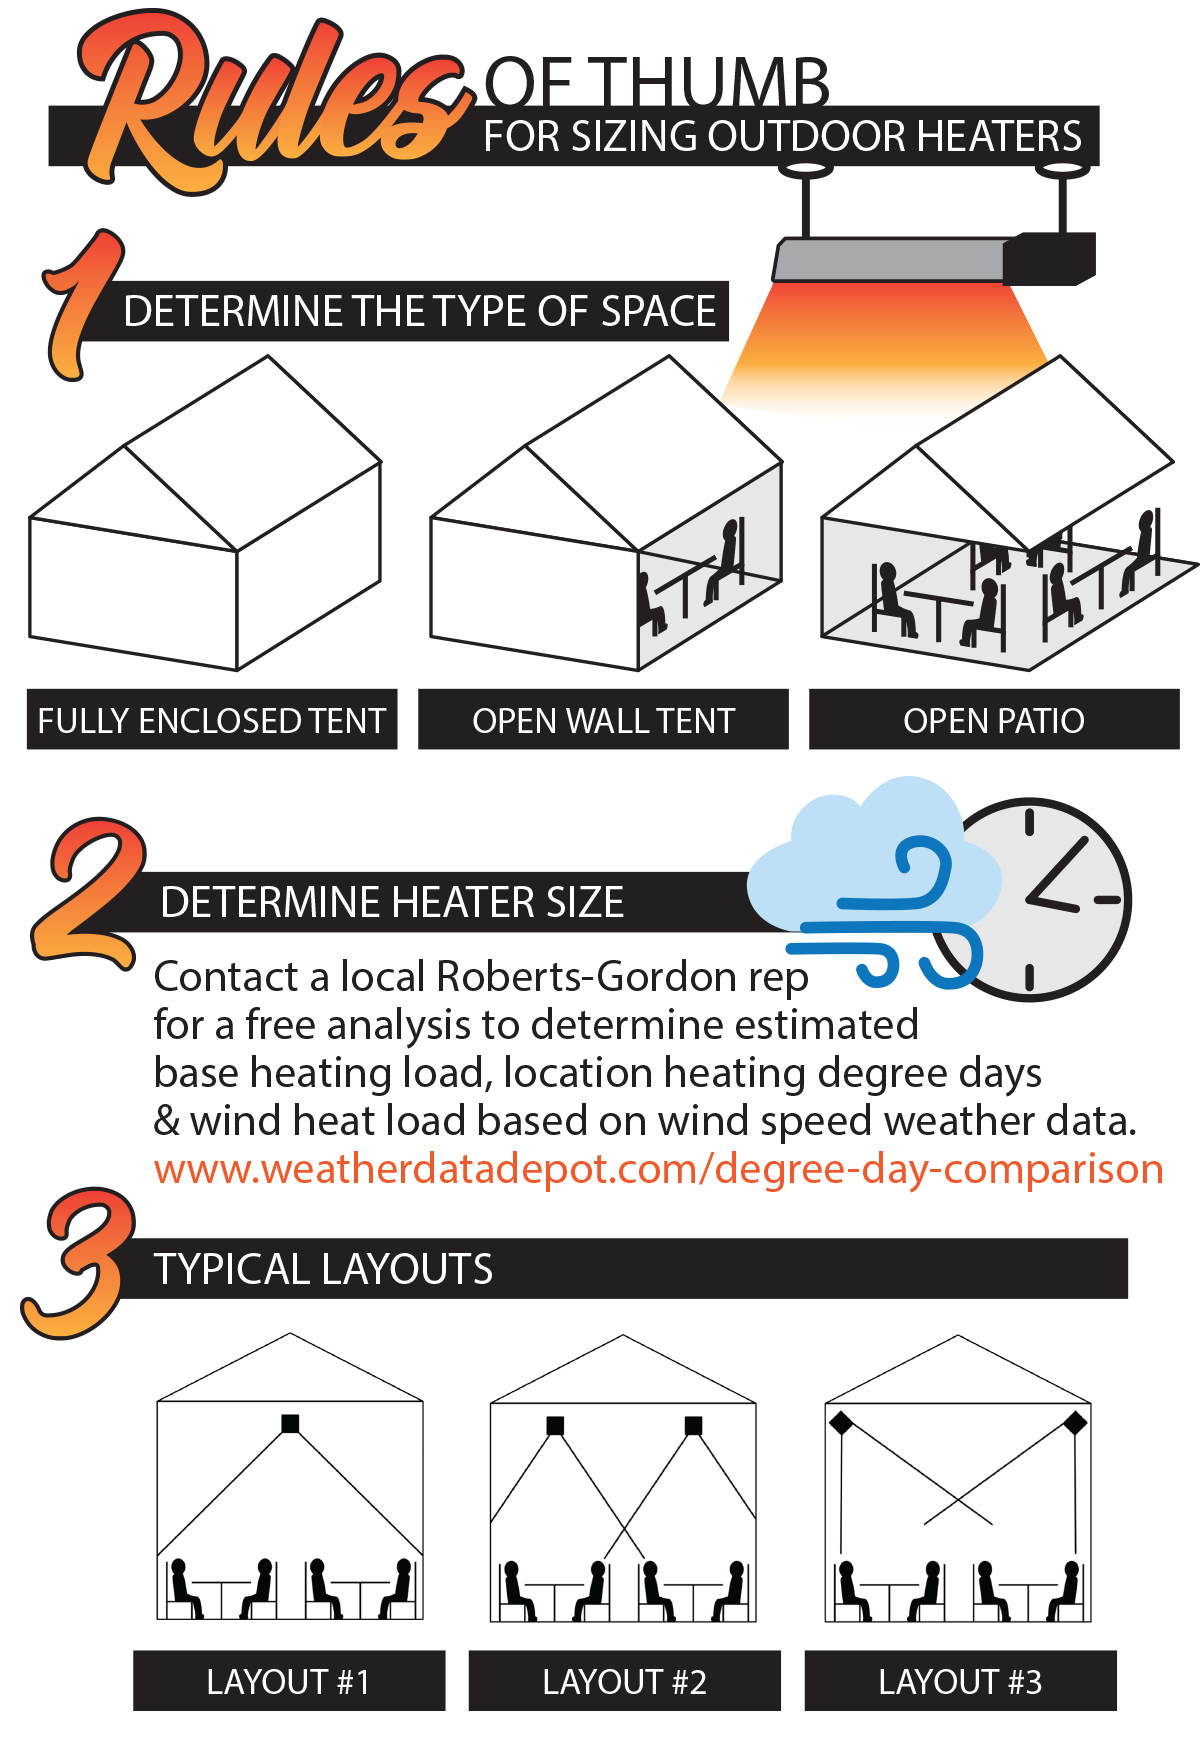 Layout diagram of outdoor heaters